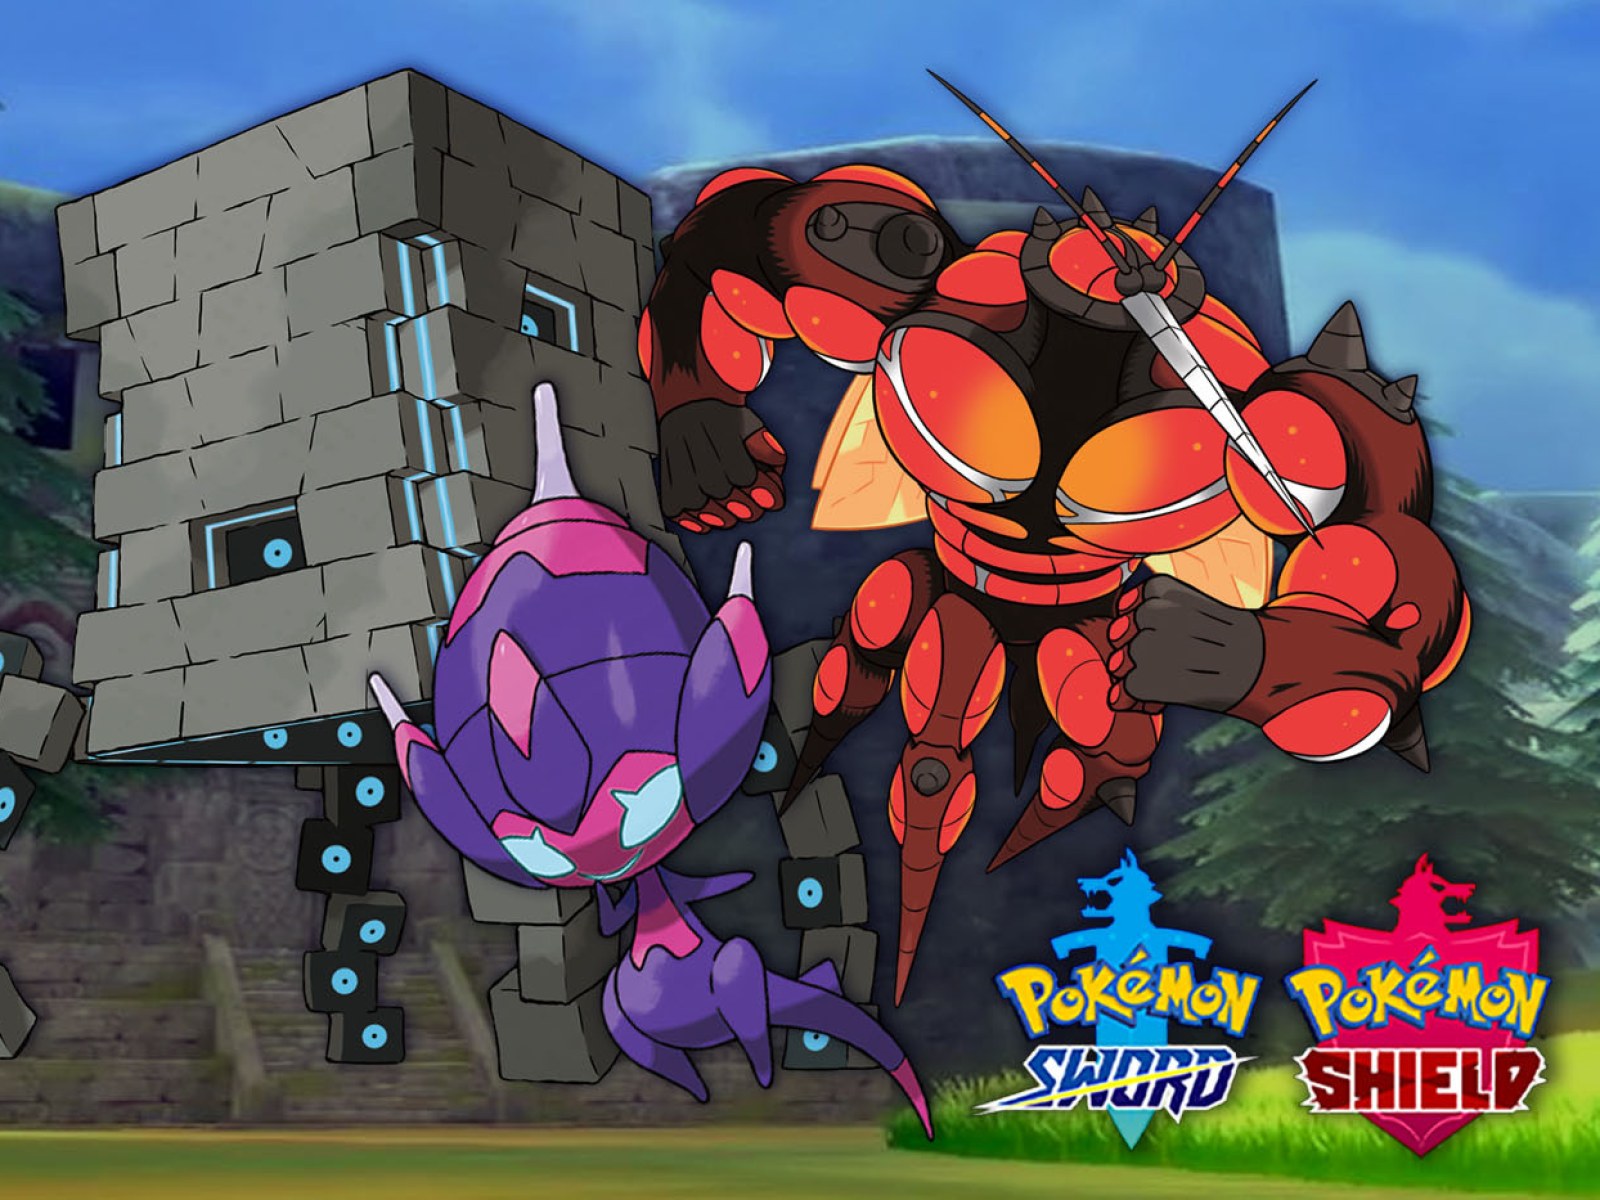 Ever since Buzzwole's addition to Unite, what other ultra beasts